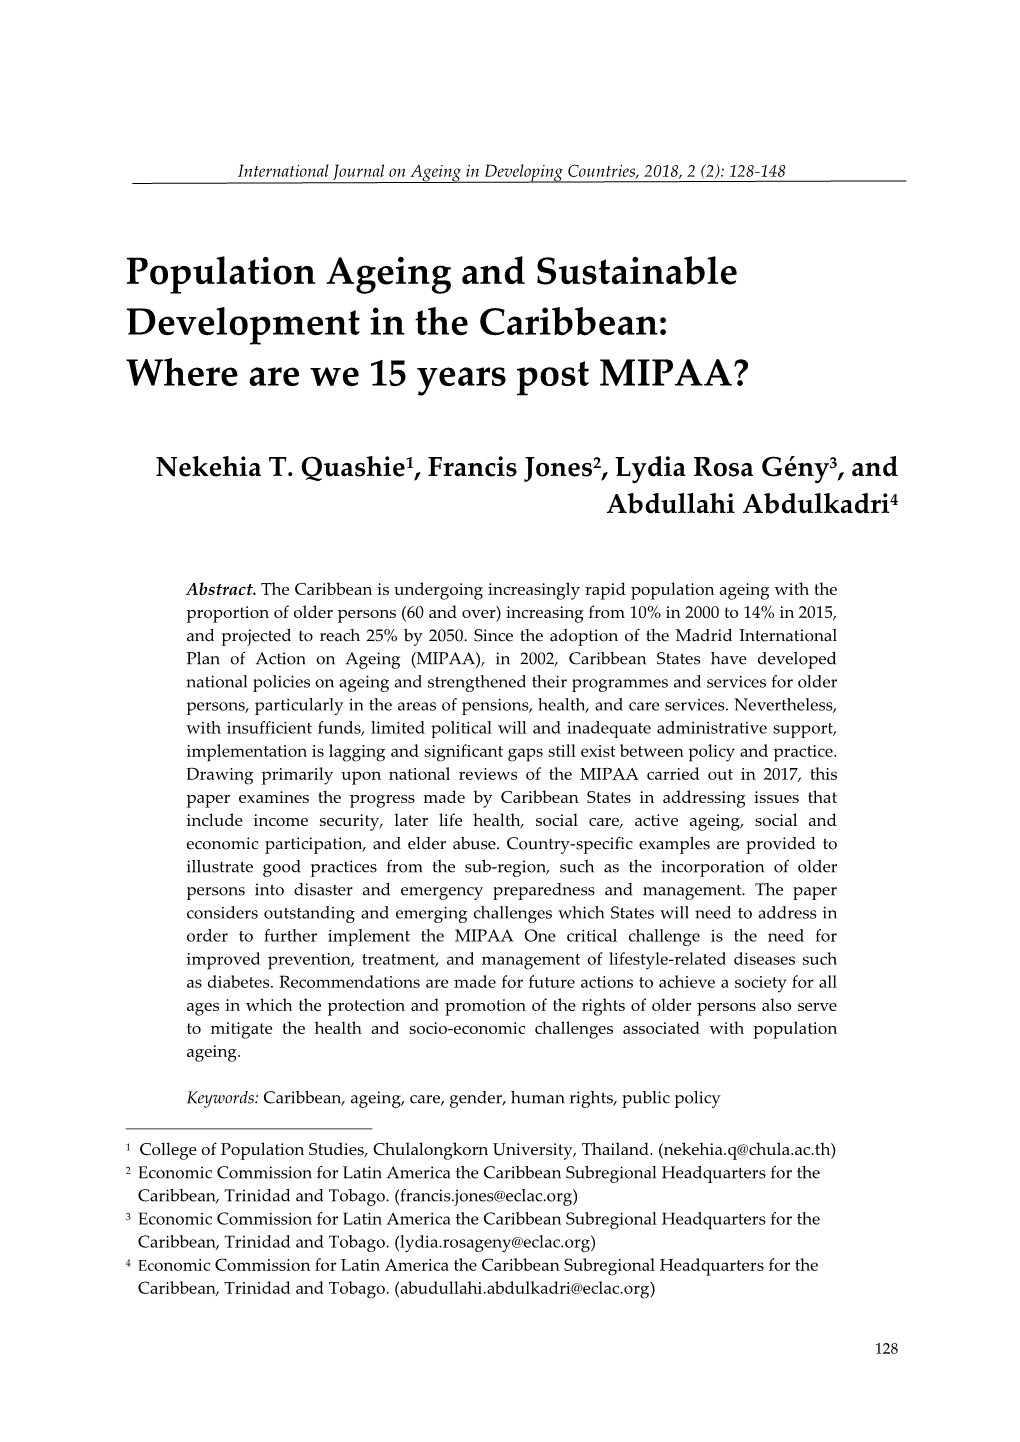 Population Ageing and Sustainable Development in the Caribbean: Where Are We 15 Years Post MIPAA?